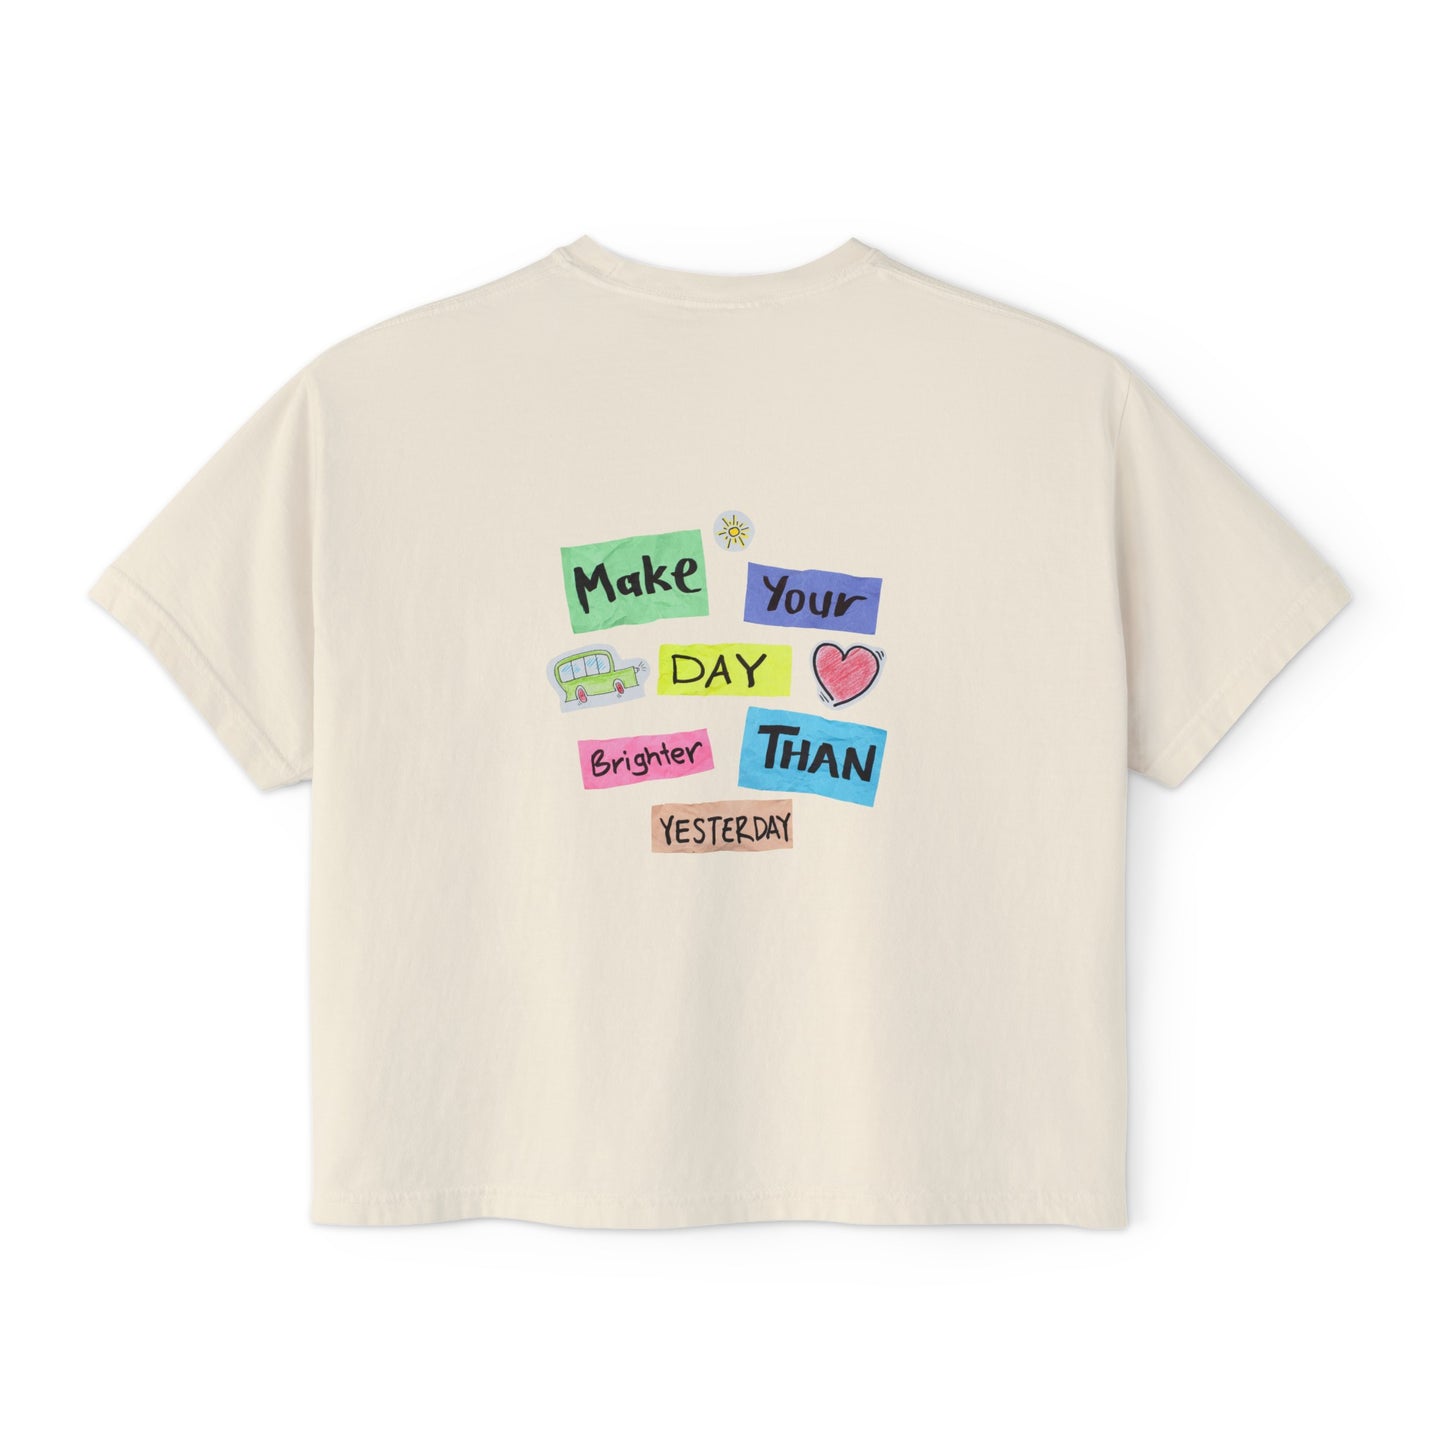 Women's Boxy Tee with Back Print - Make Your Day Brighter Than Yesterday